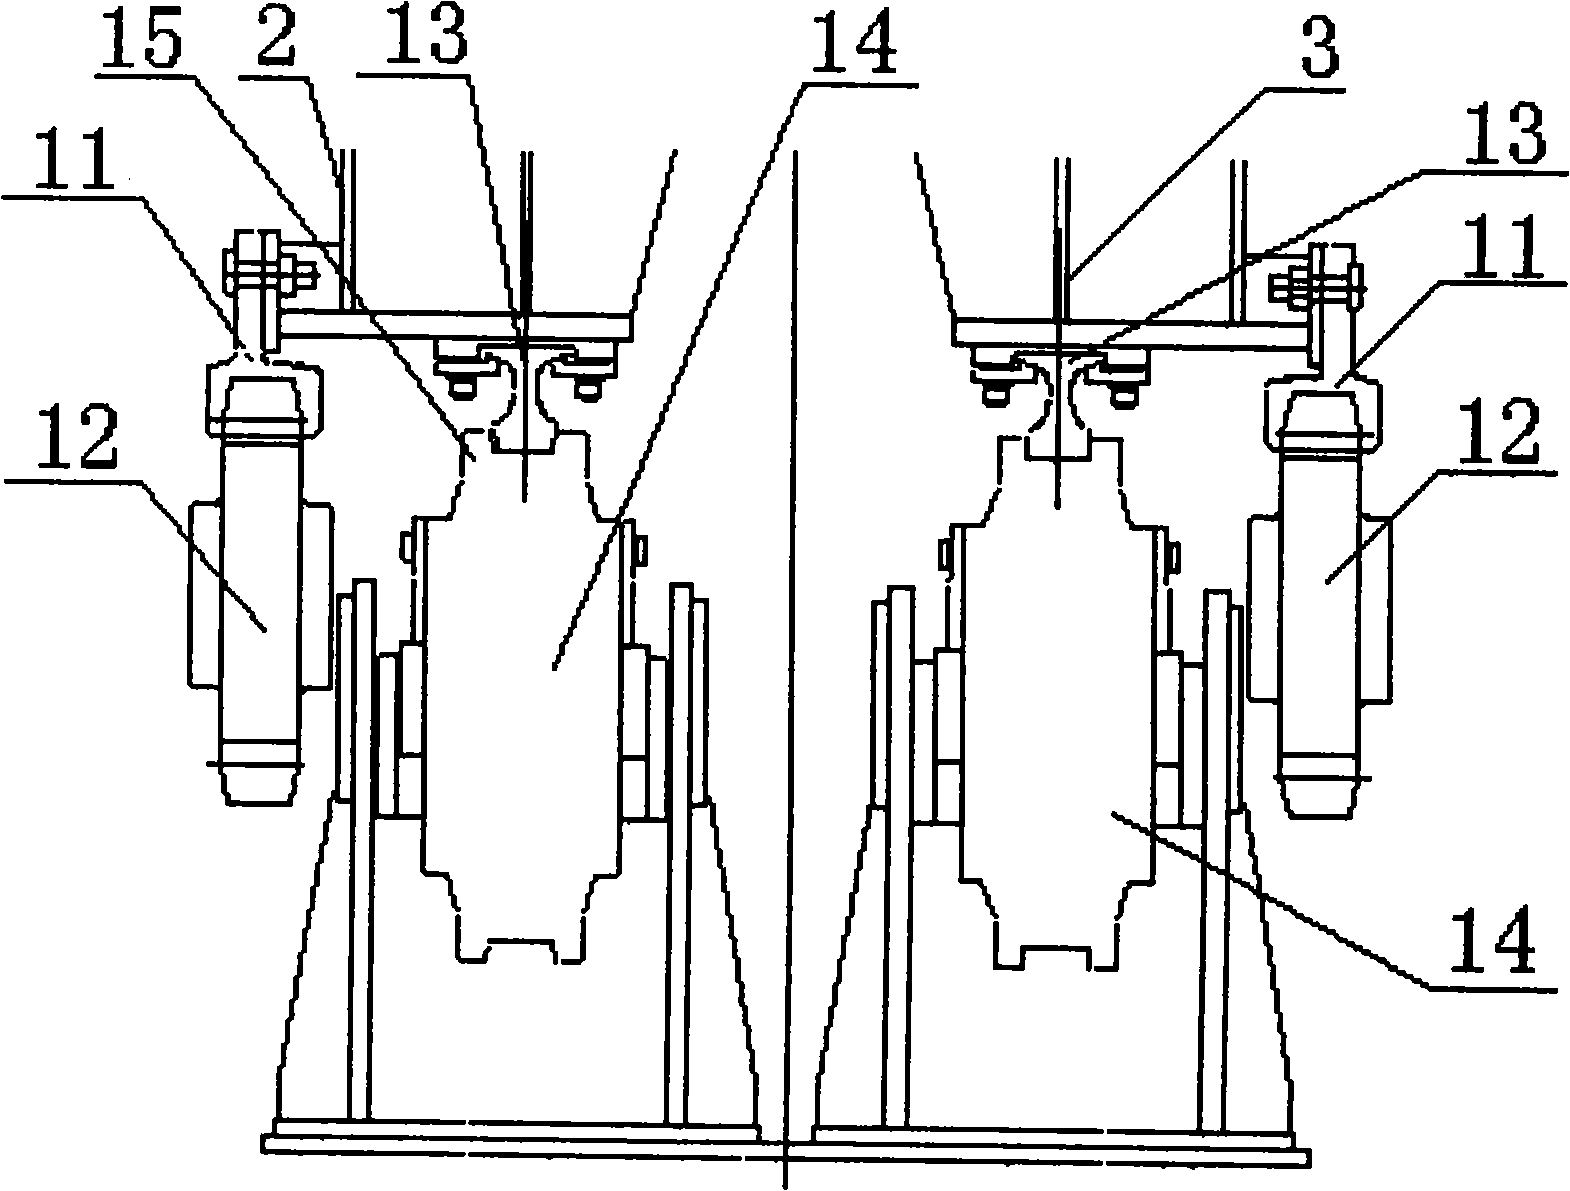 Four-fulcrum double-vehicle tipping apparatus